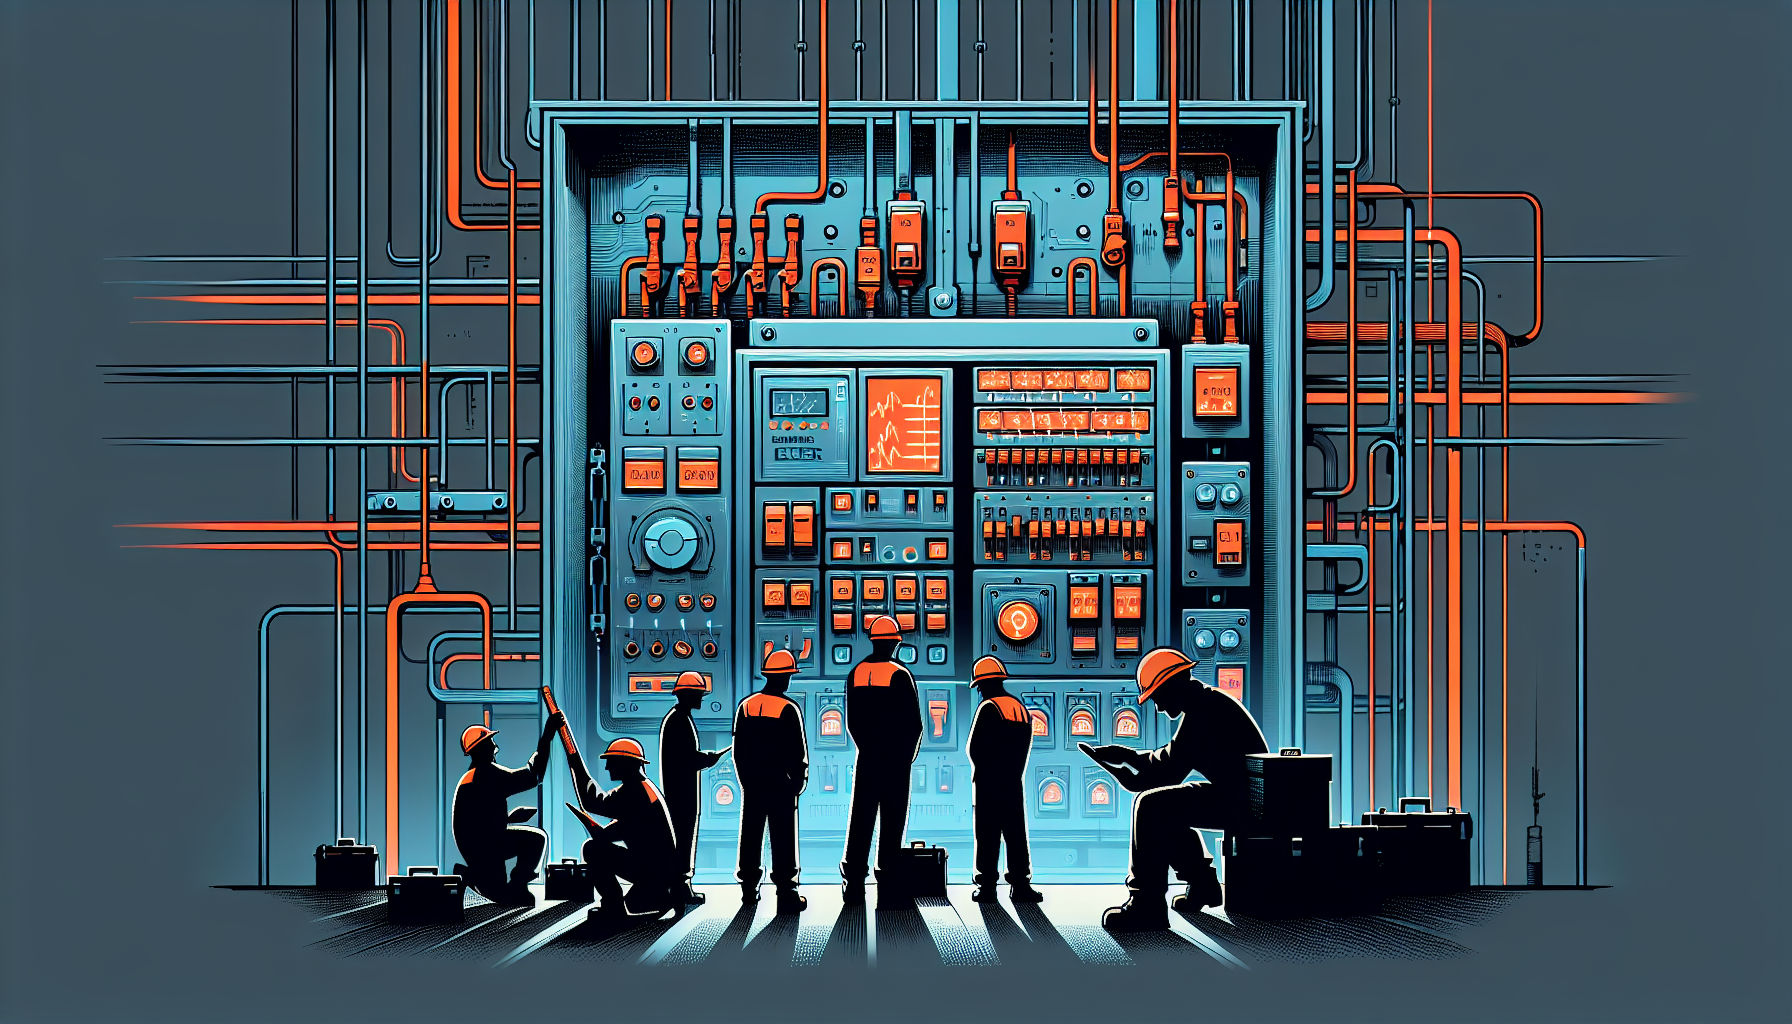 Illustration of electrical subcontractors around an industrial panel for a circuit breaker sizing guide